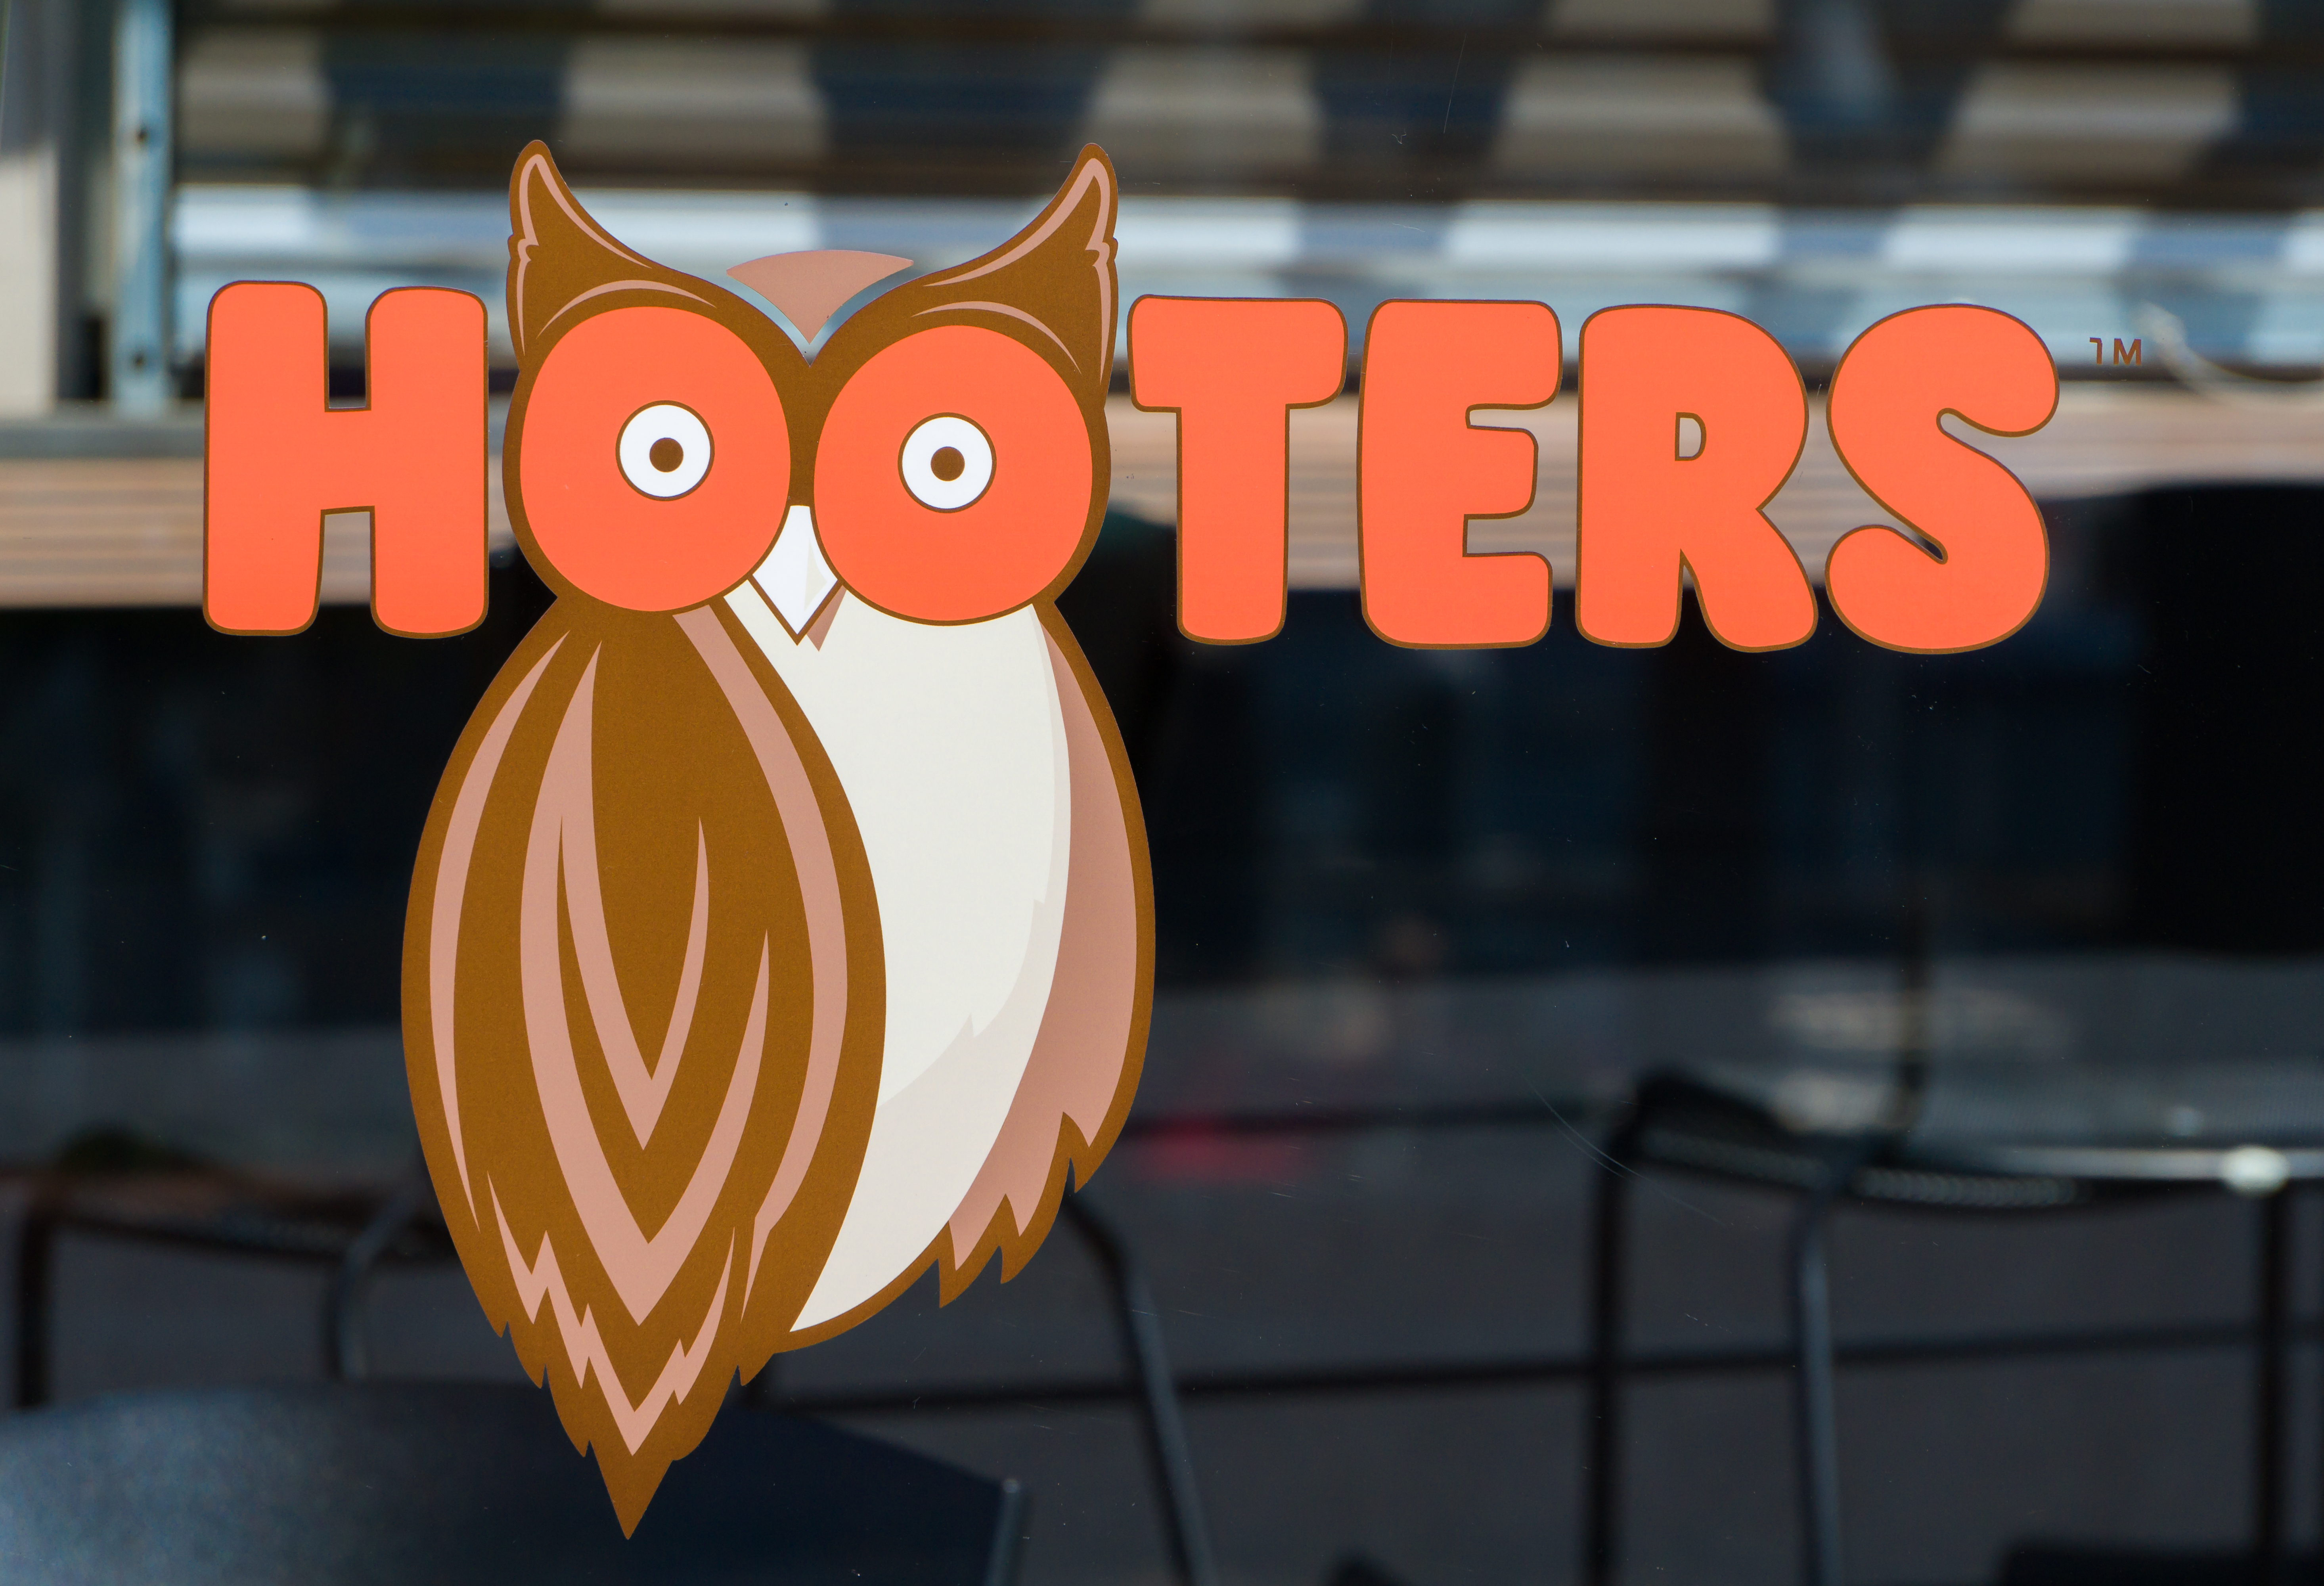 Hooters and other restaurants in Cancun